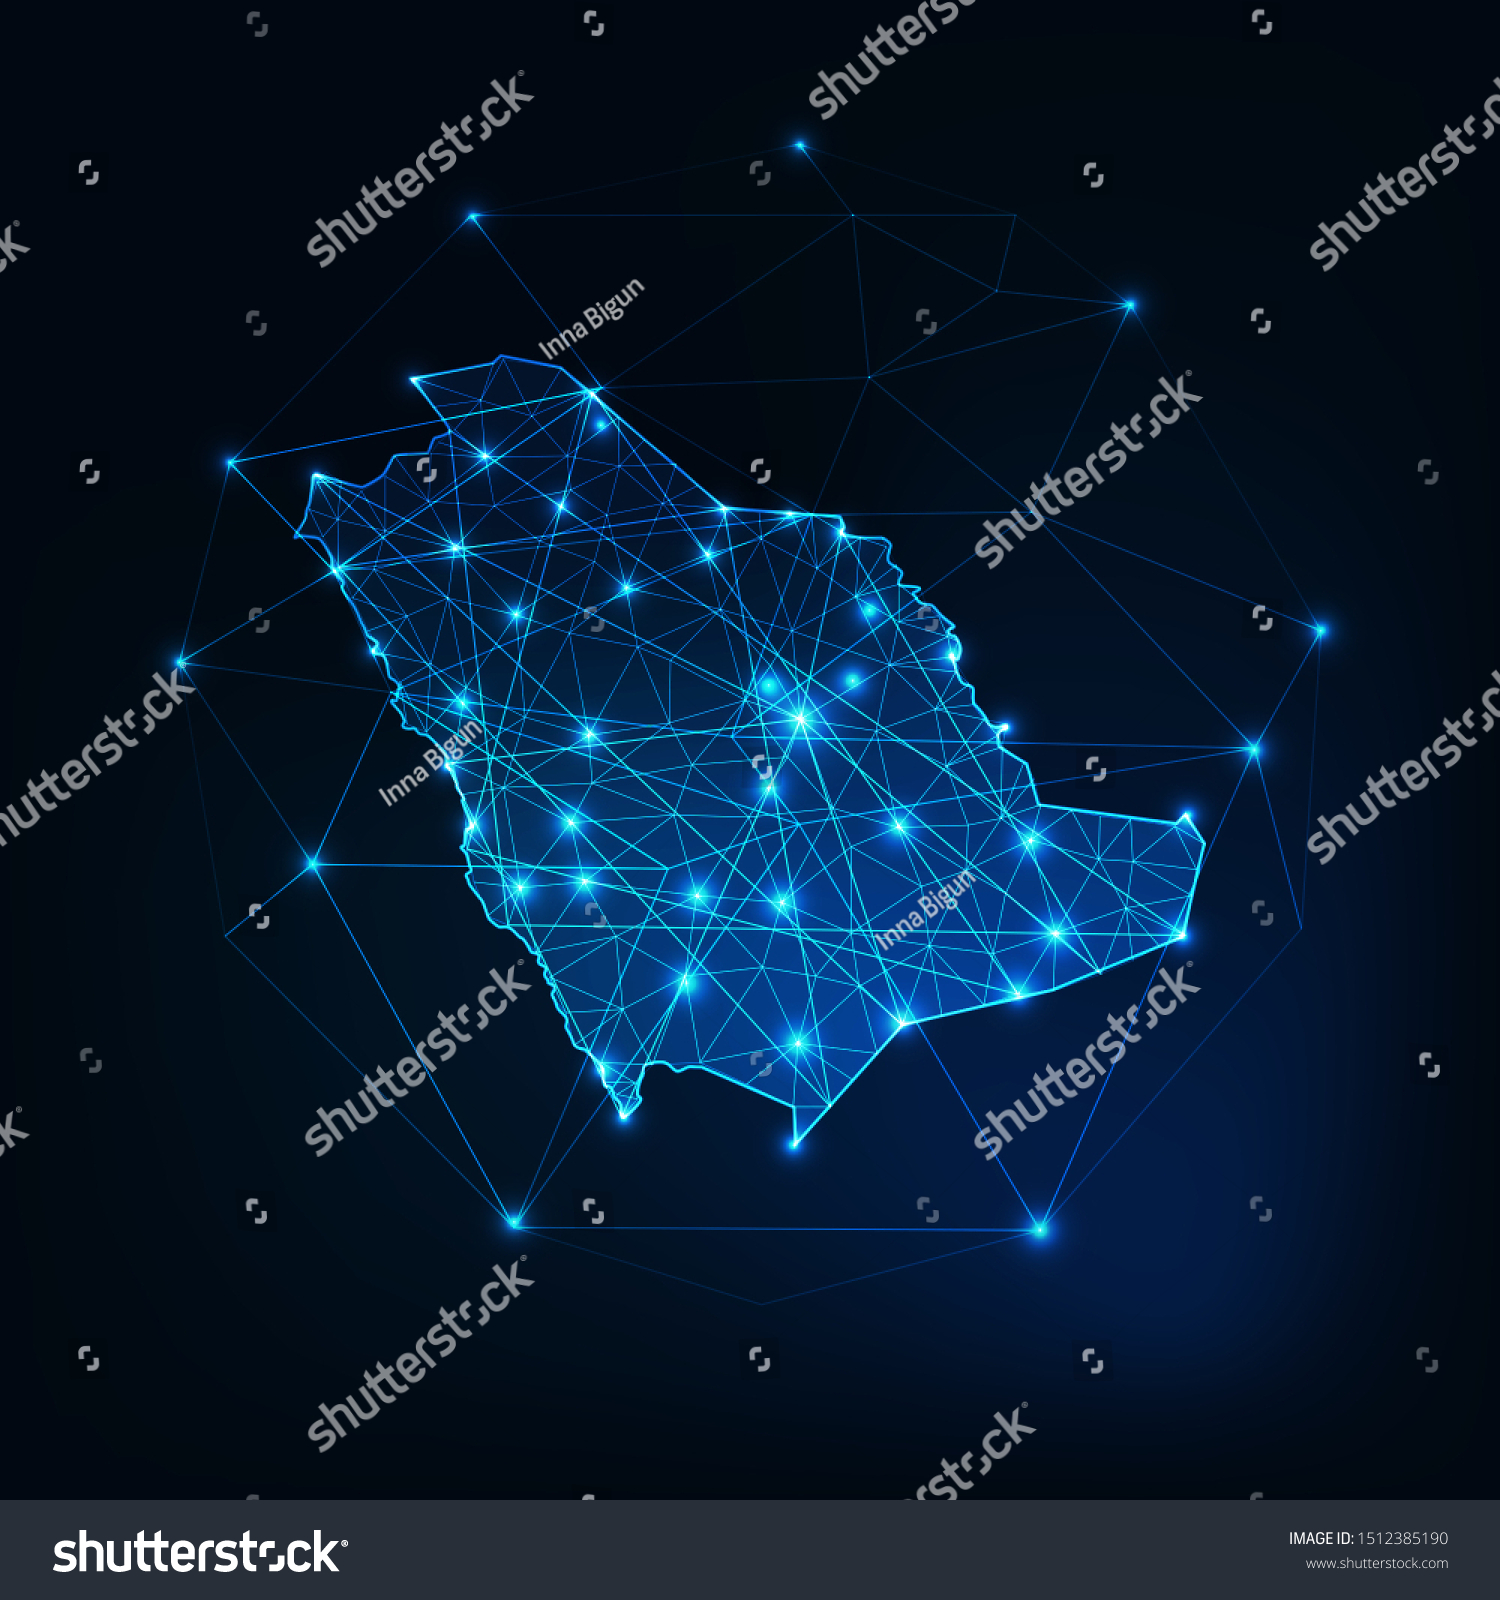 Stock Vector Saudi Arabia Map Outline With Stars And Lines Abstract Framework Communication Connection Concept 1512385190 